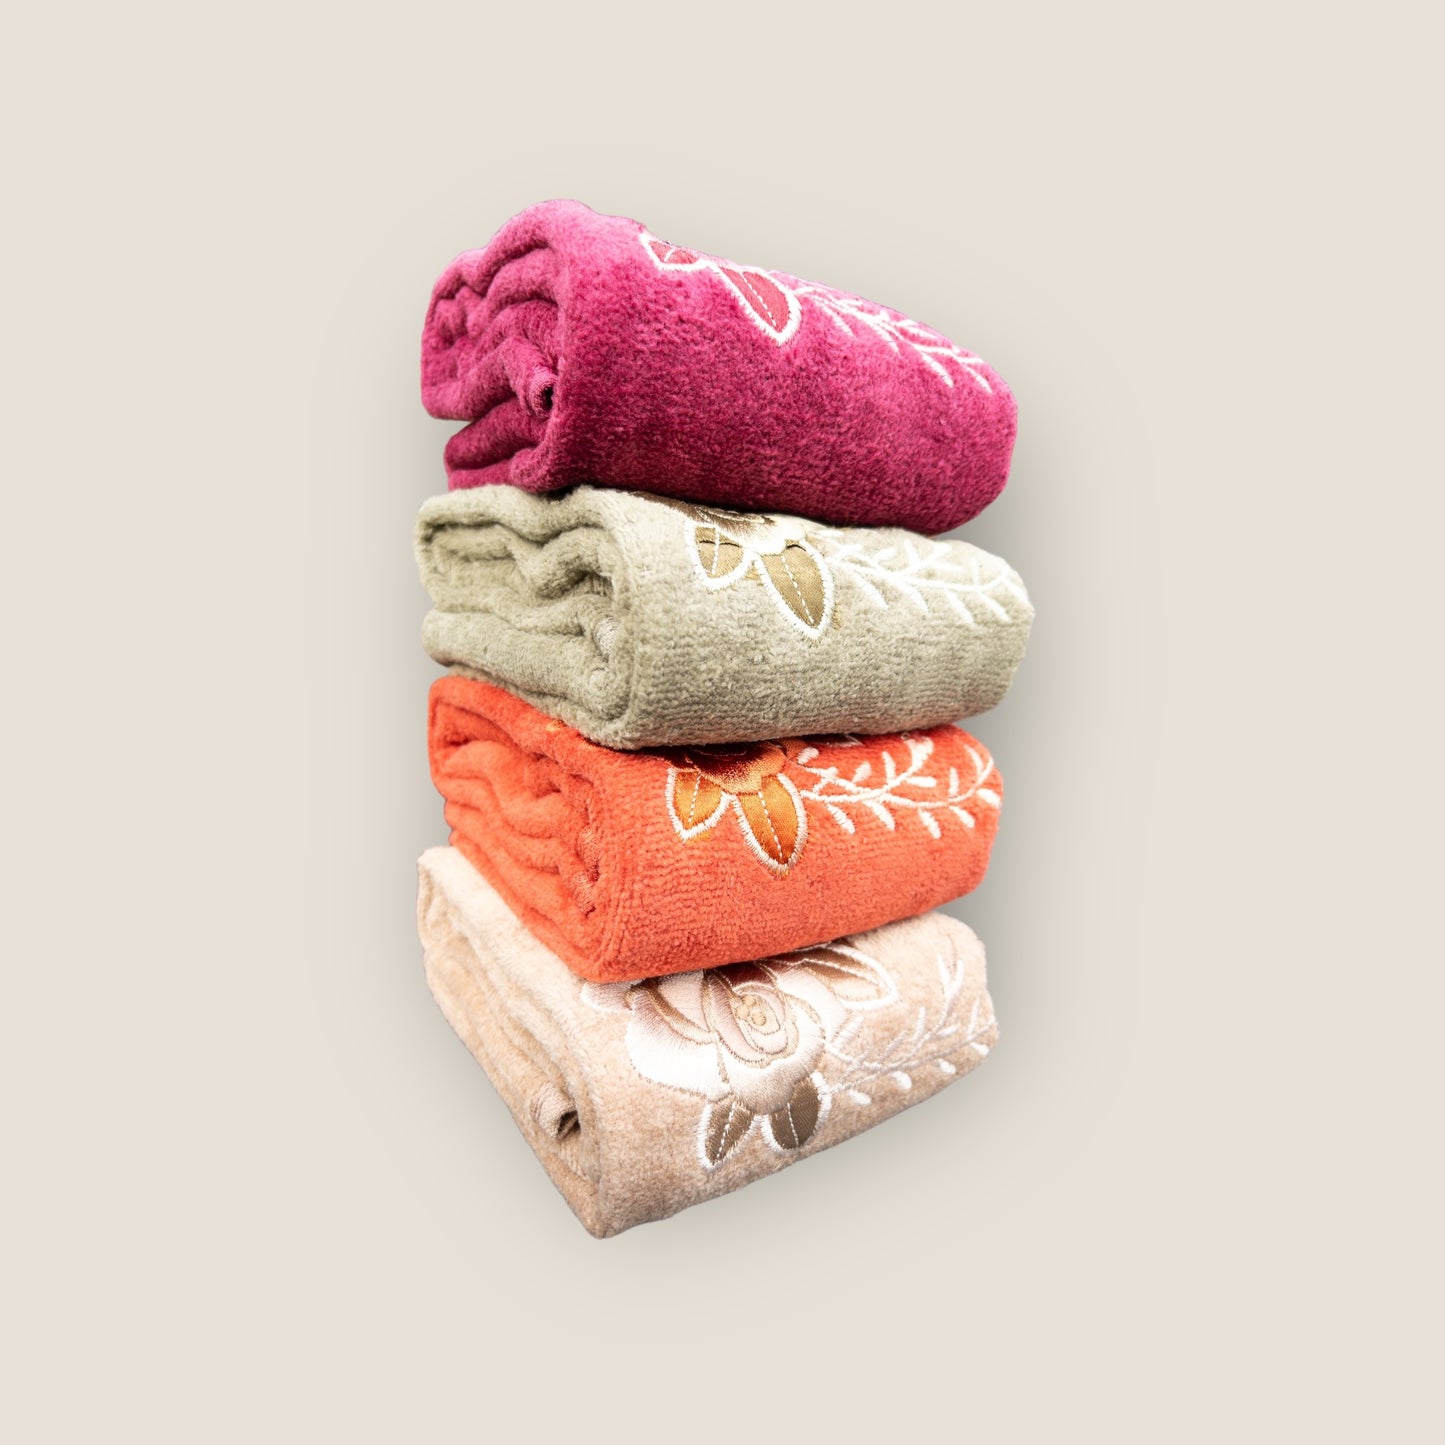 Four brightly colored hand towels with floral embroidery, stacked on top of each other